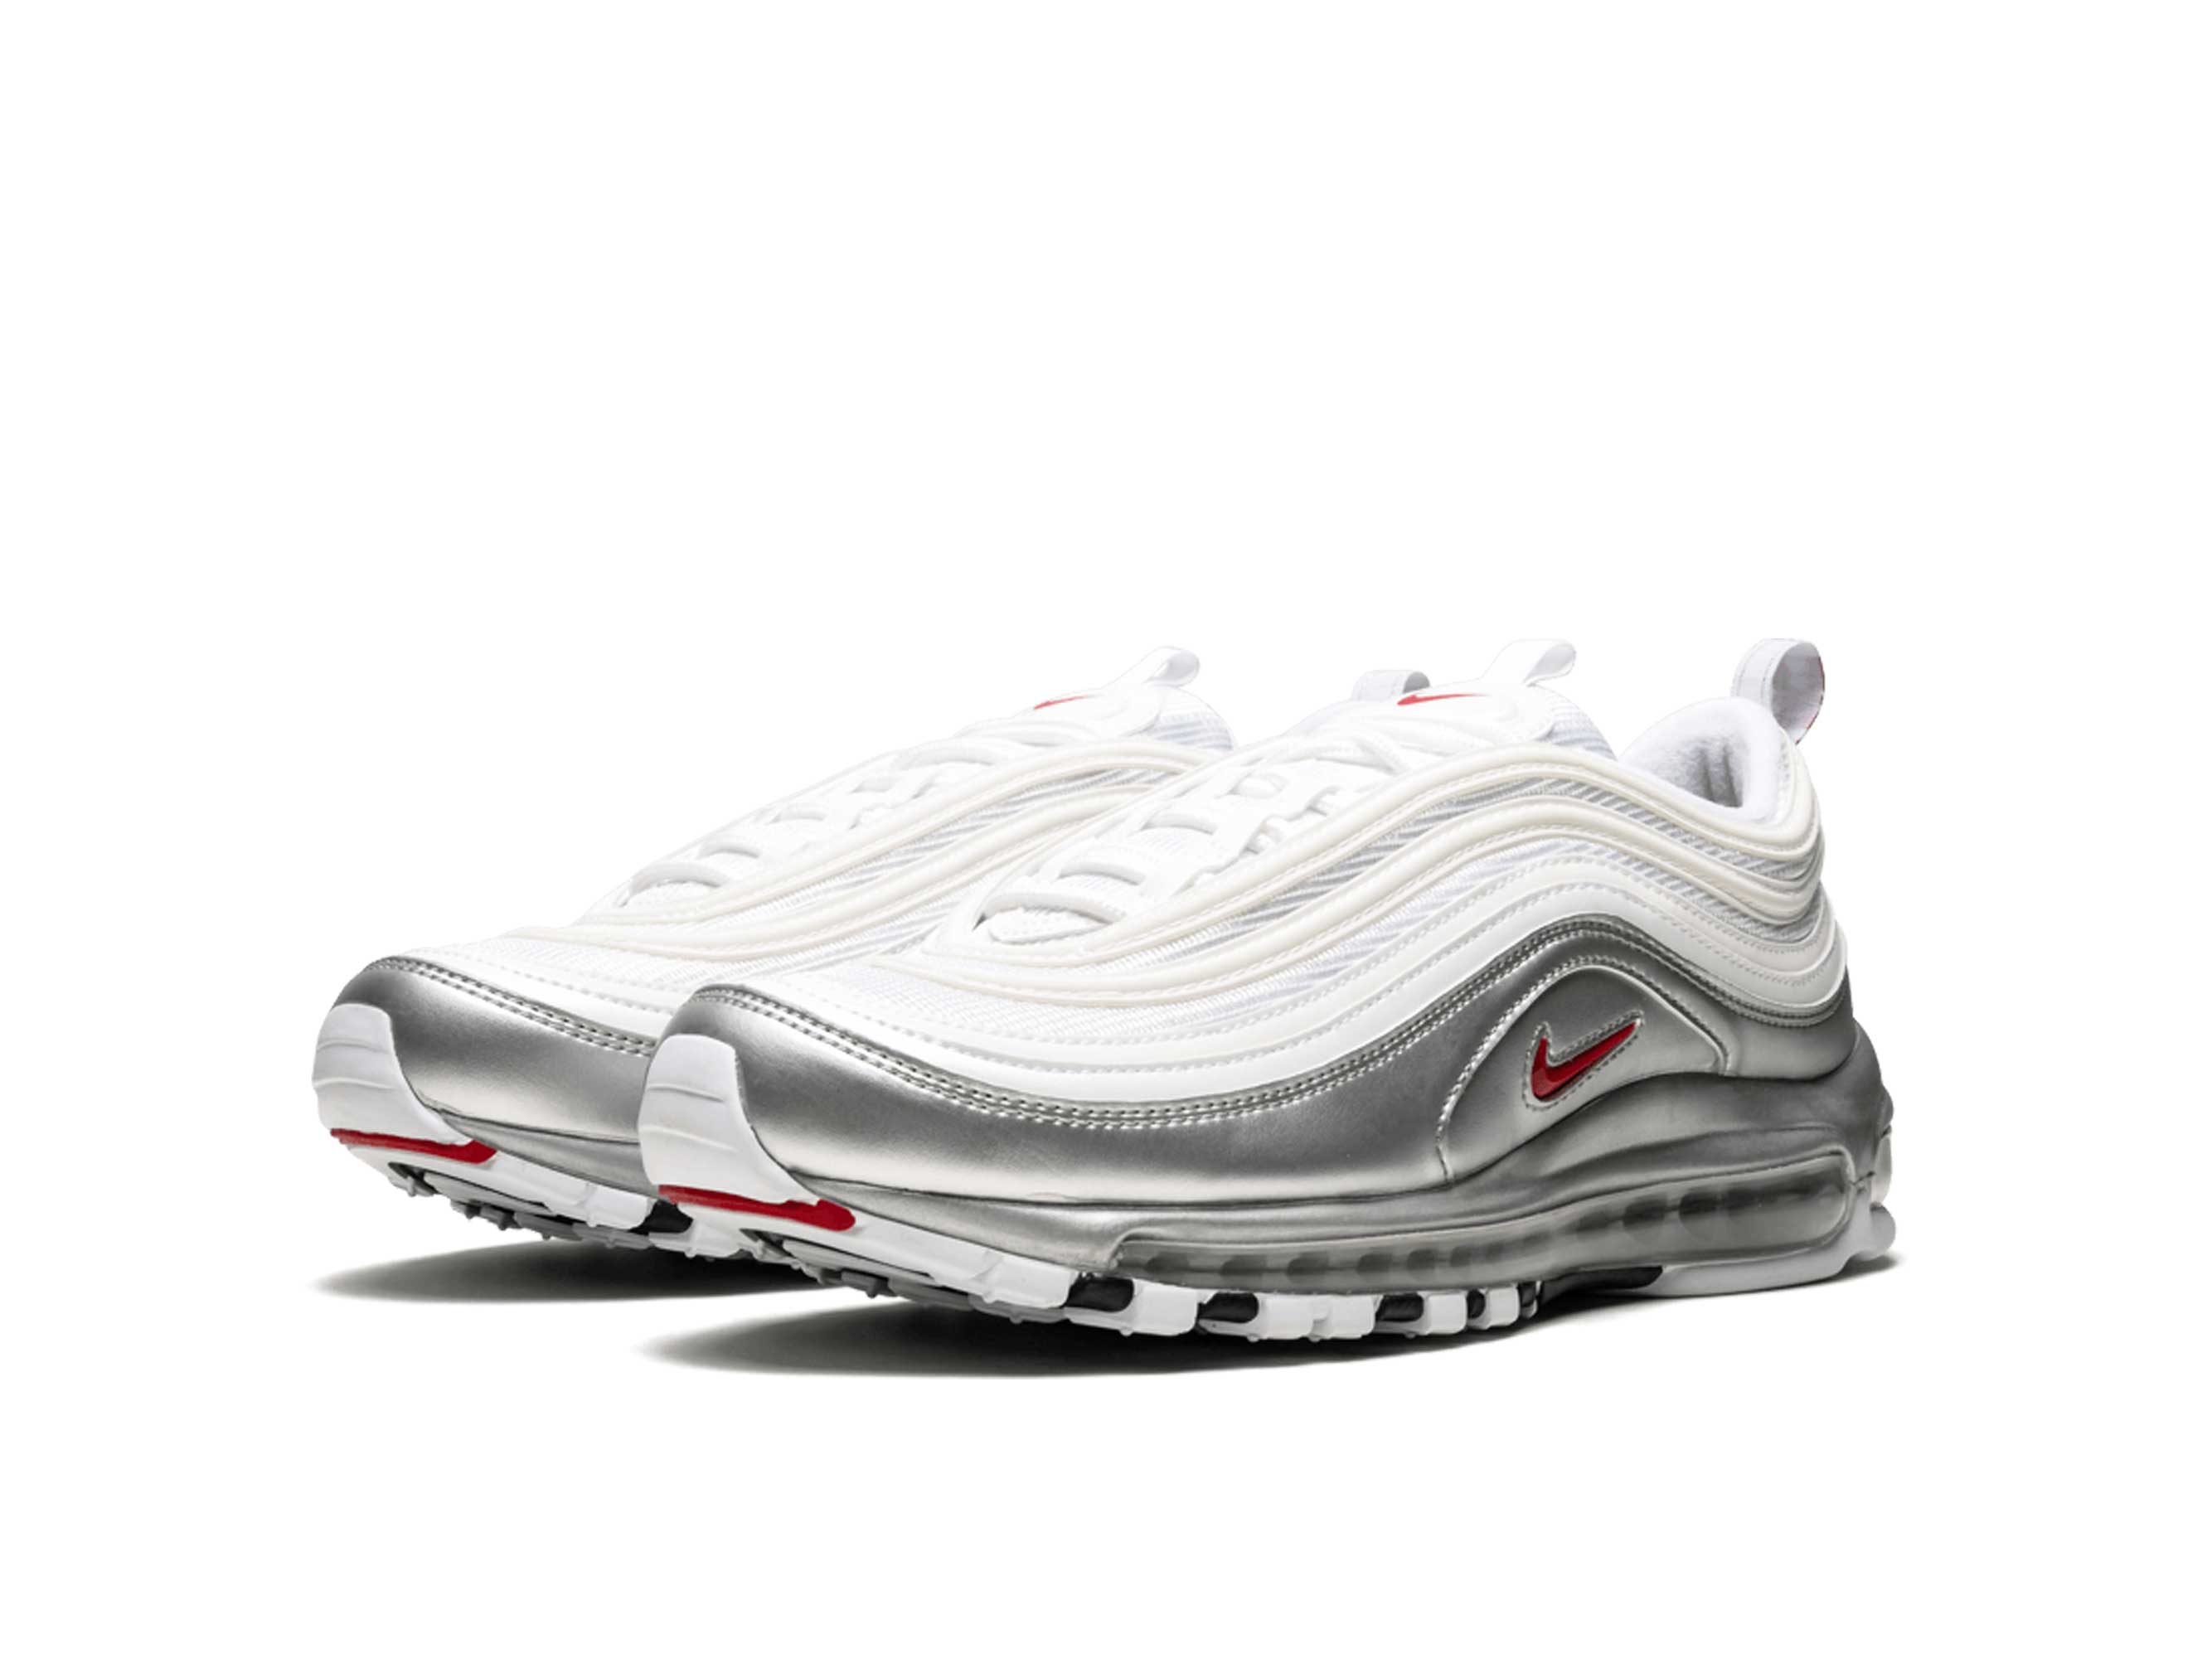 white and silver air max 97